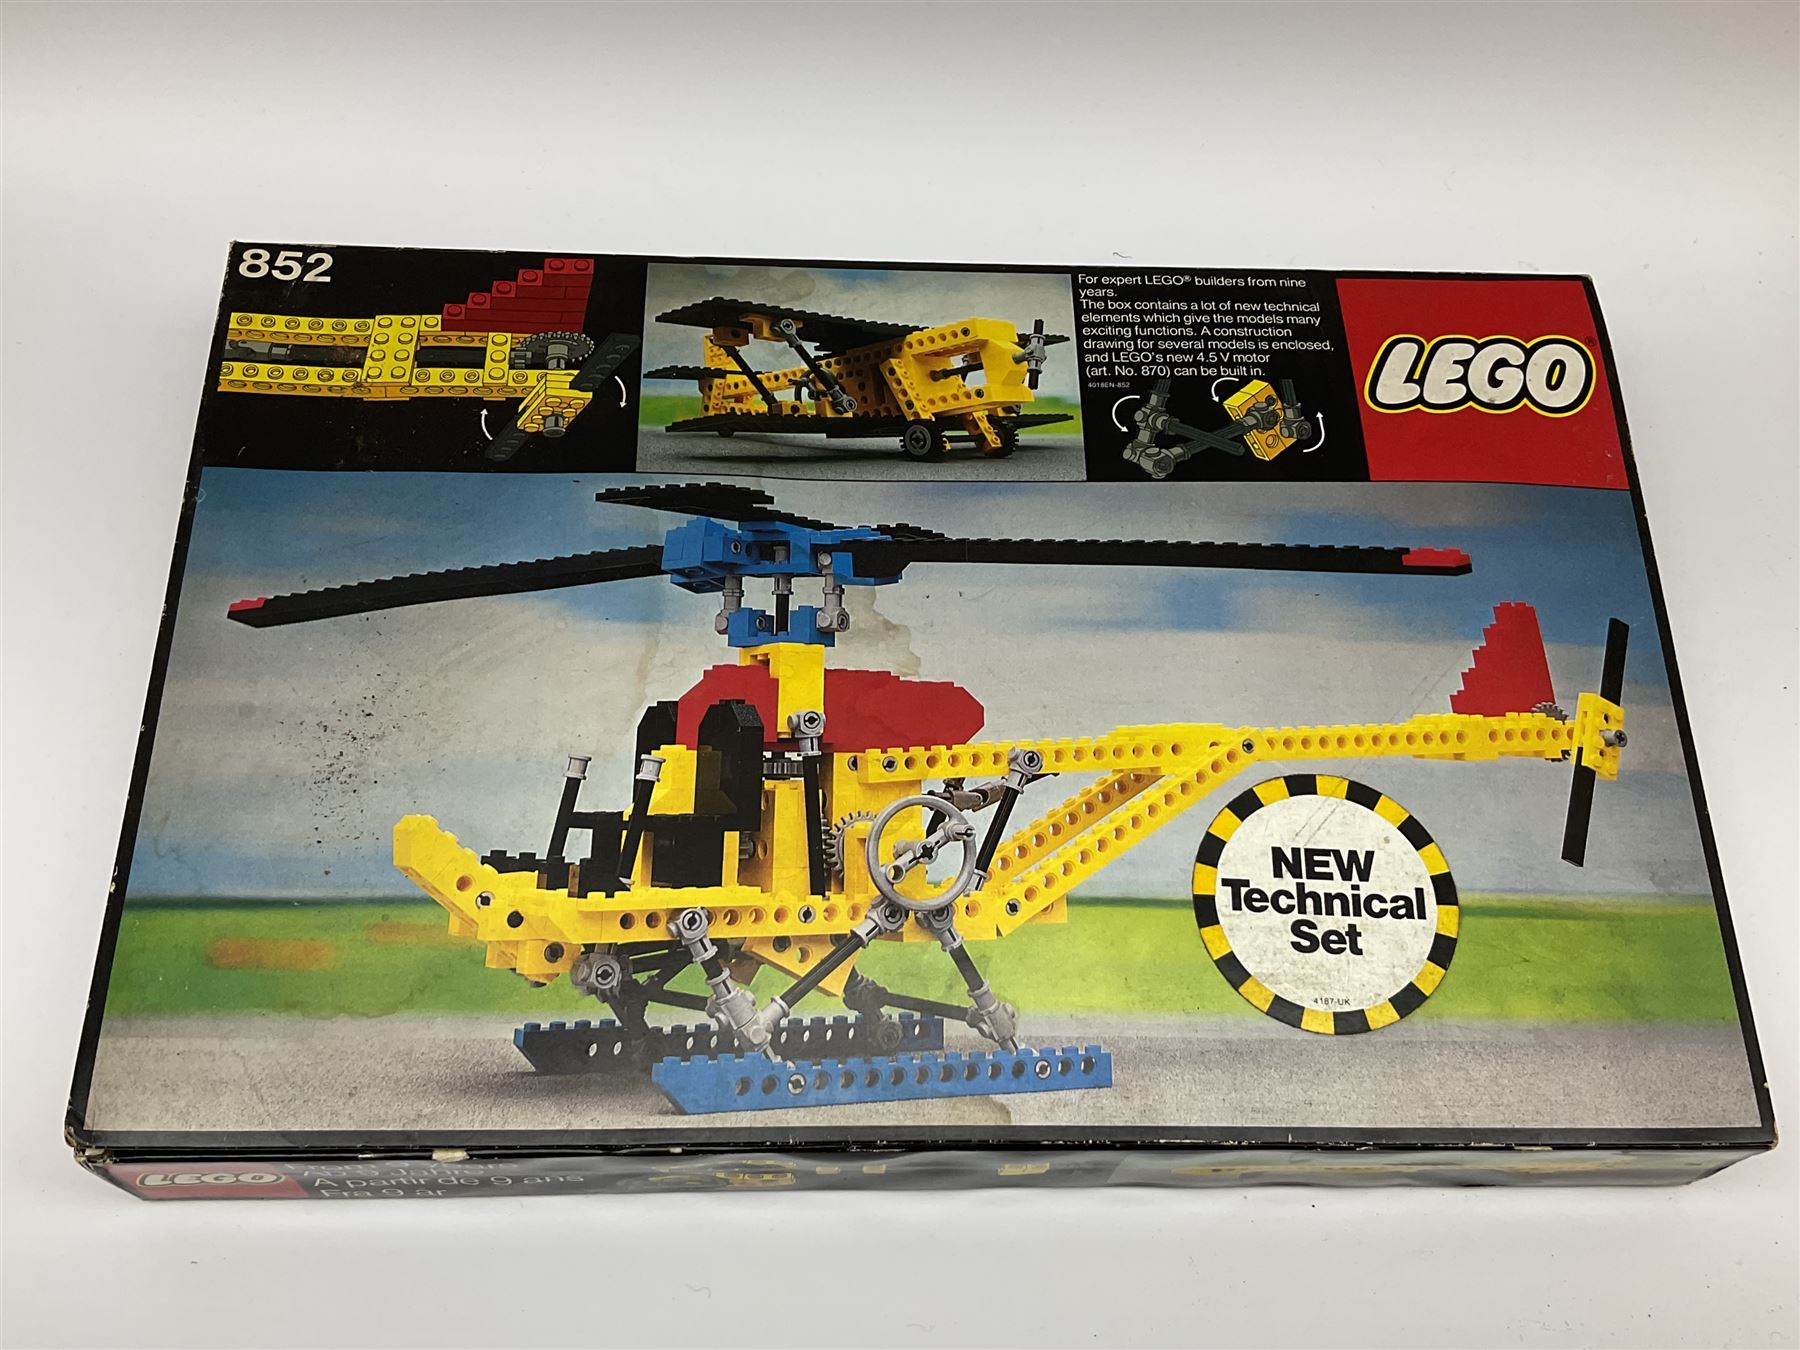 Lego - Technical set 852 for a helicopter - Image 2 of 4